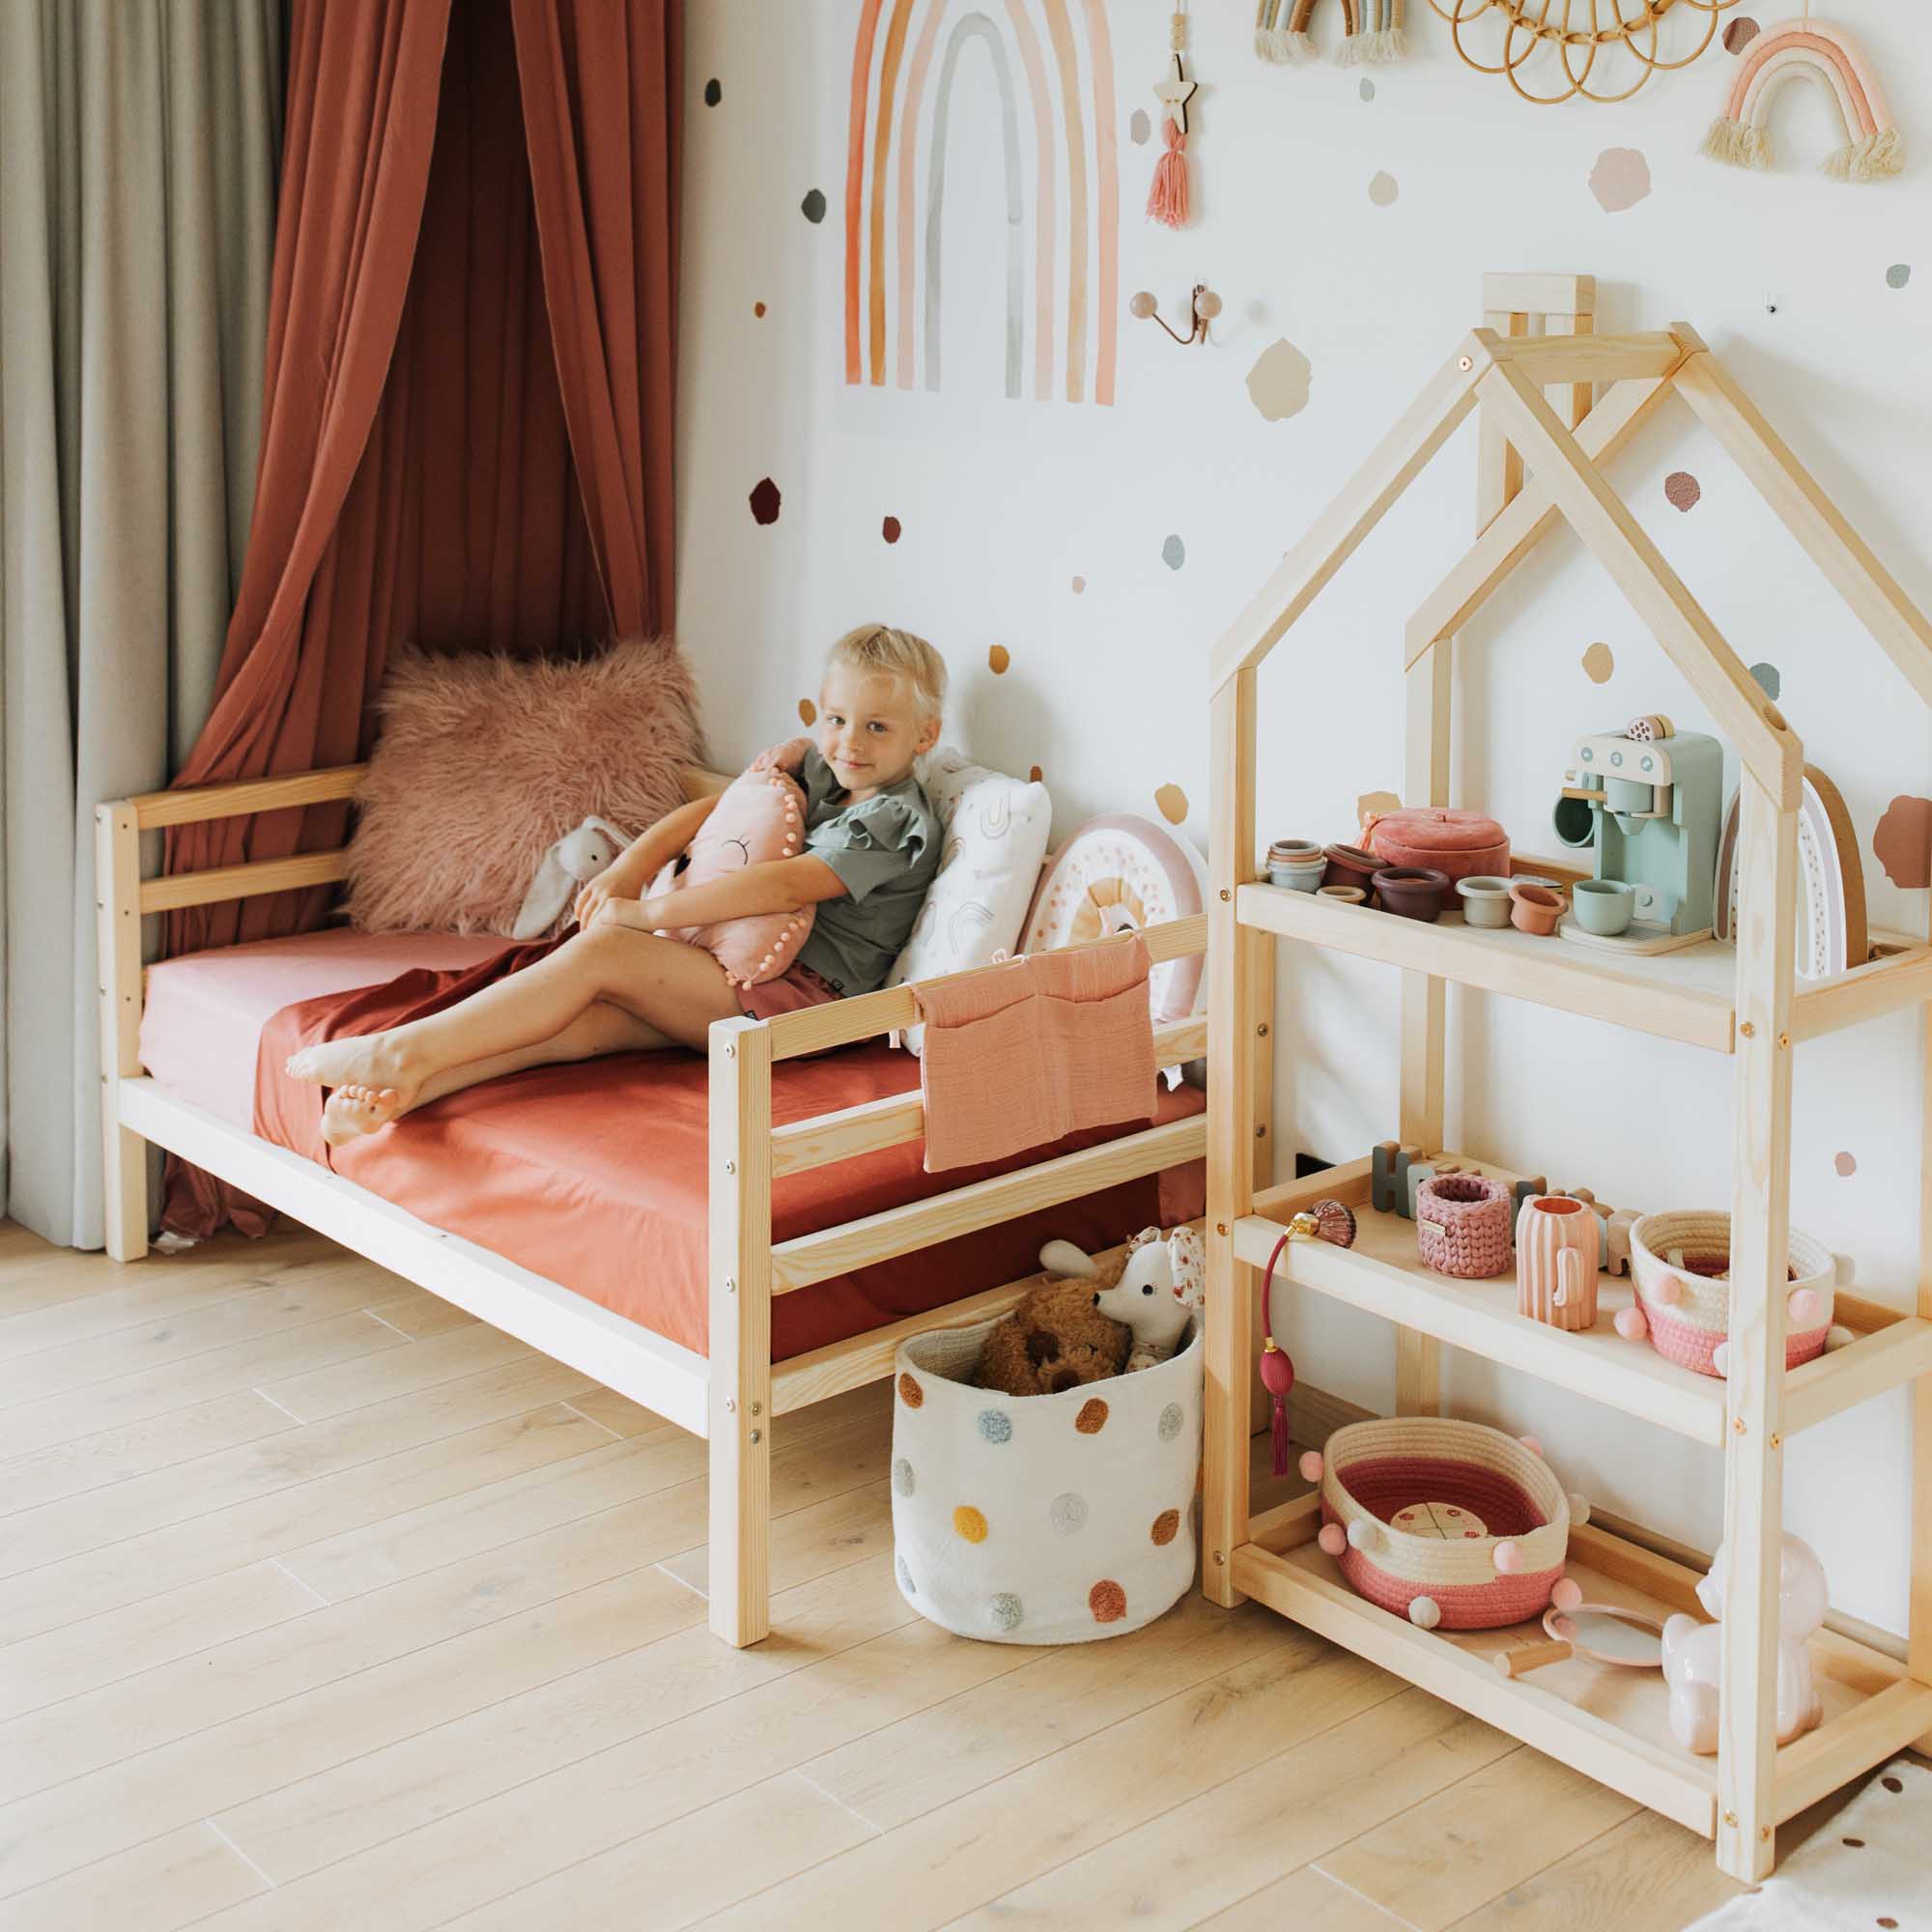 A girl is sitting on a bed in a child's room.